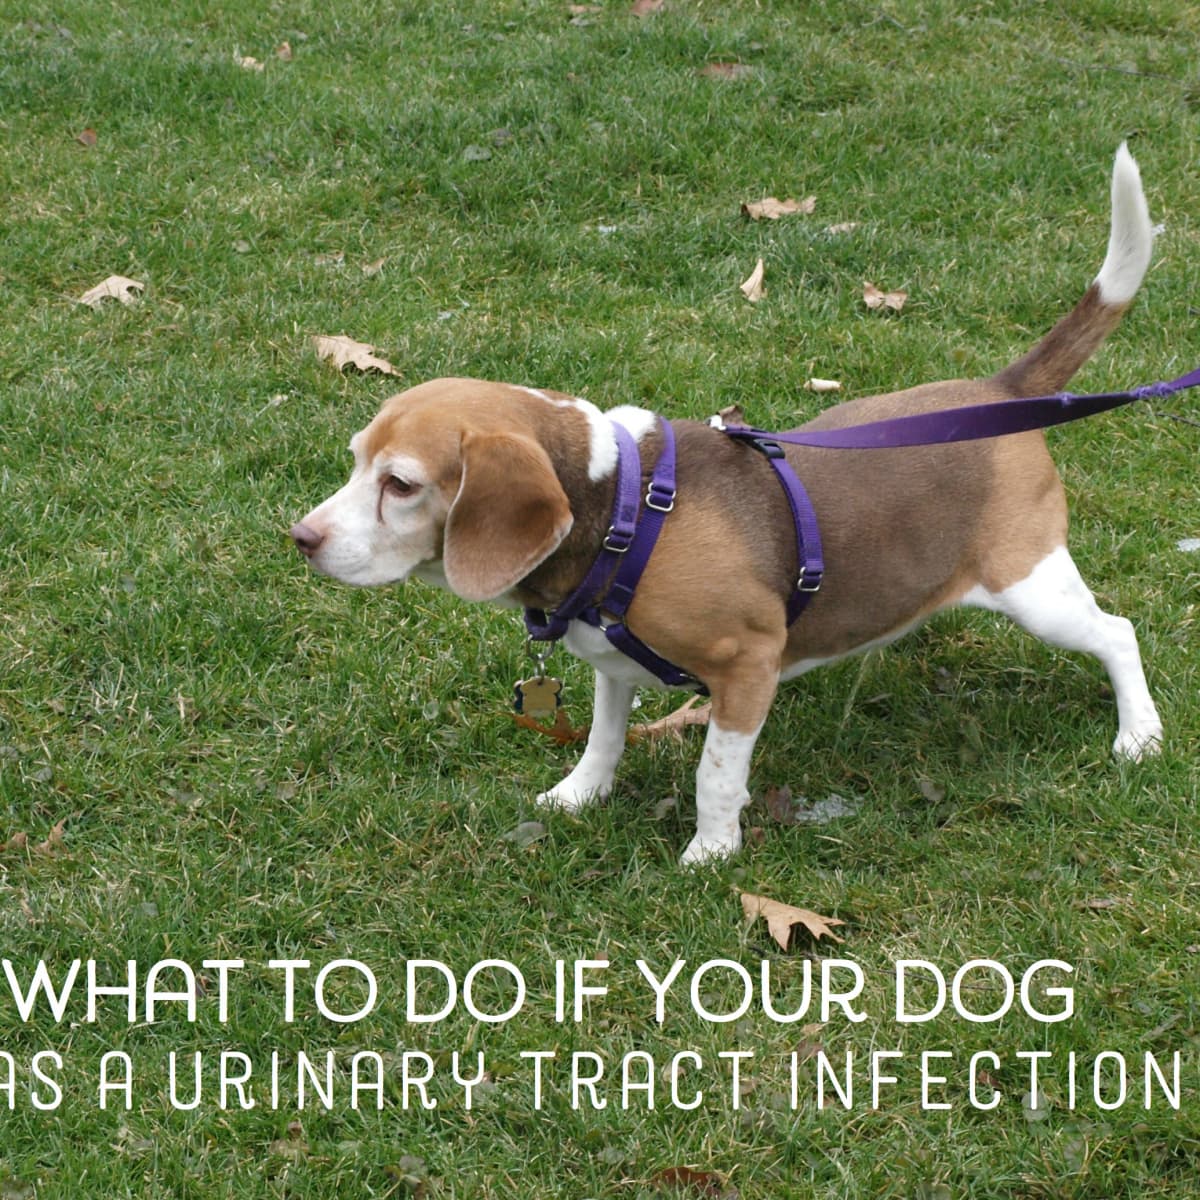 Home Remedies for Dogs With Urinary Tract Infections - PetHelpful